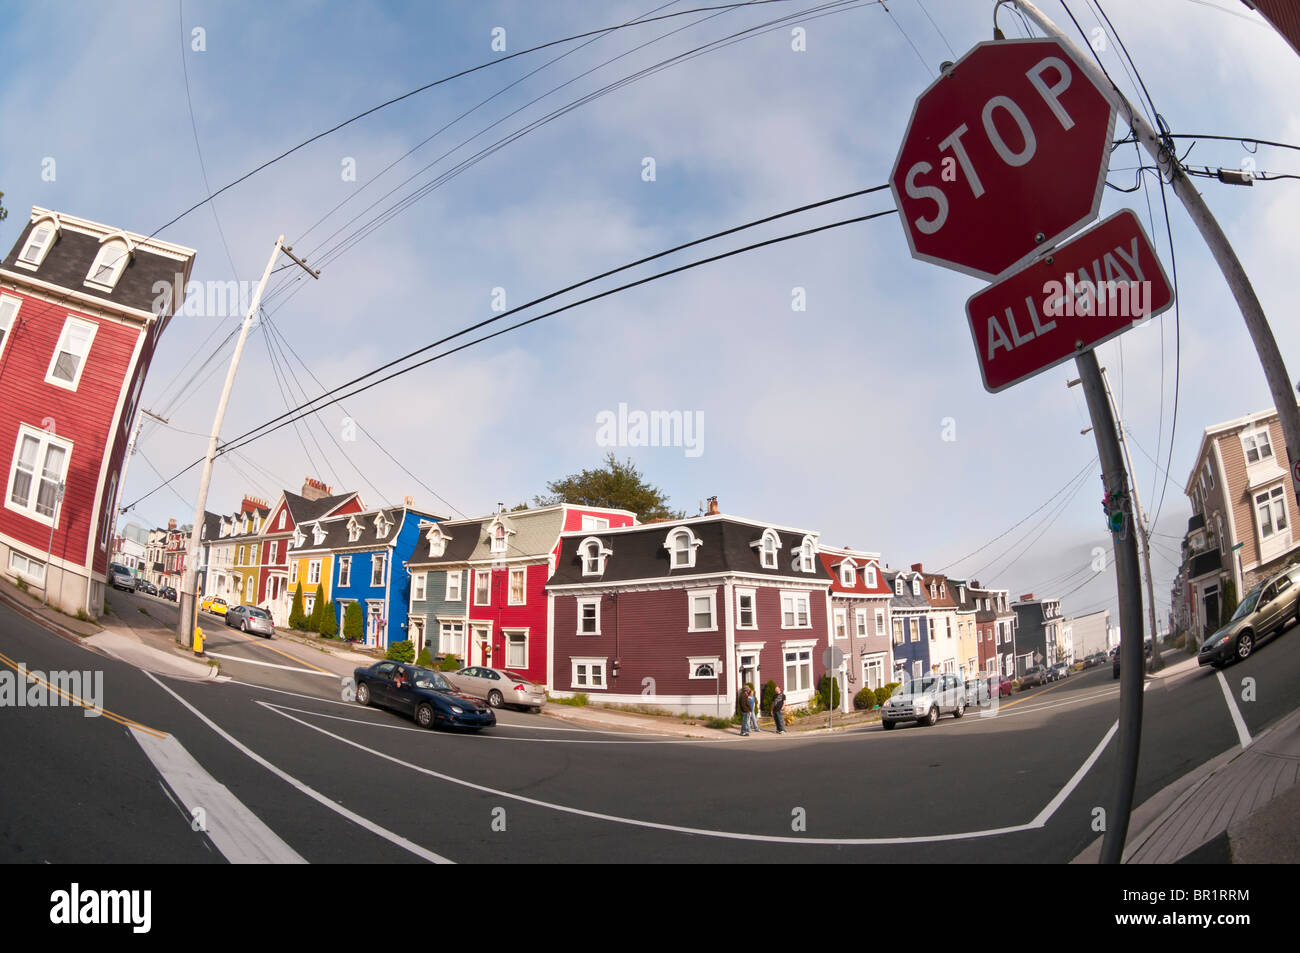 Fish-eye image of colorful jelly bean row houses, junction of Cochrane and Gower Streets, St. John's, Newfoundland, Canada Stock Photo